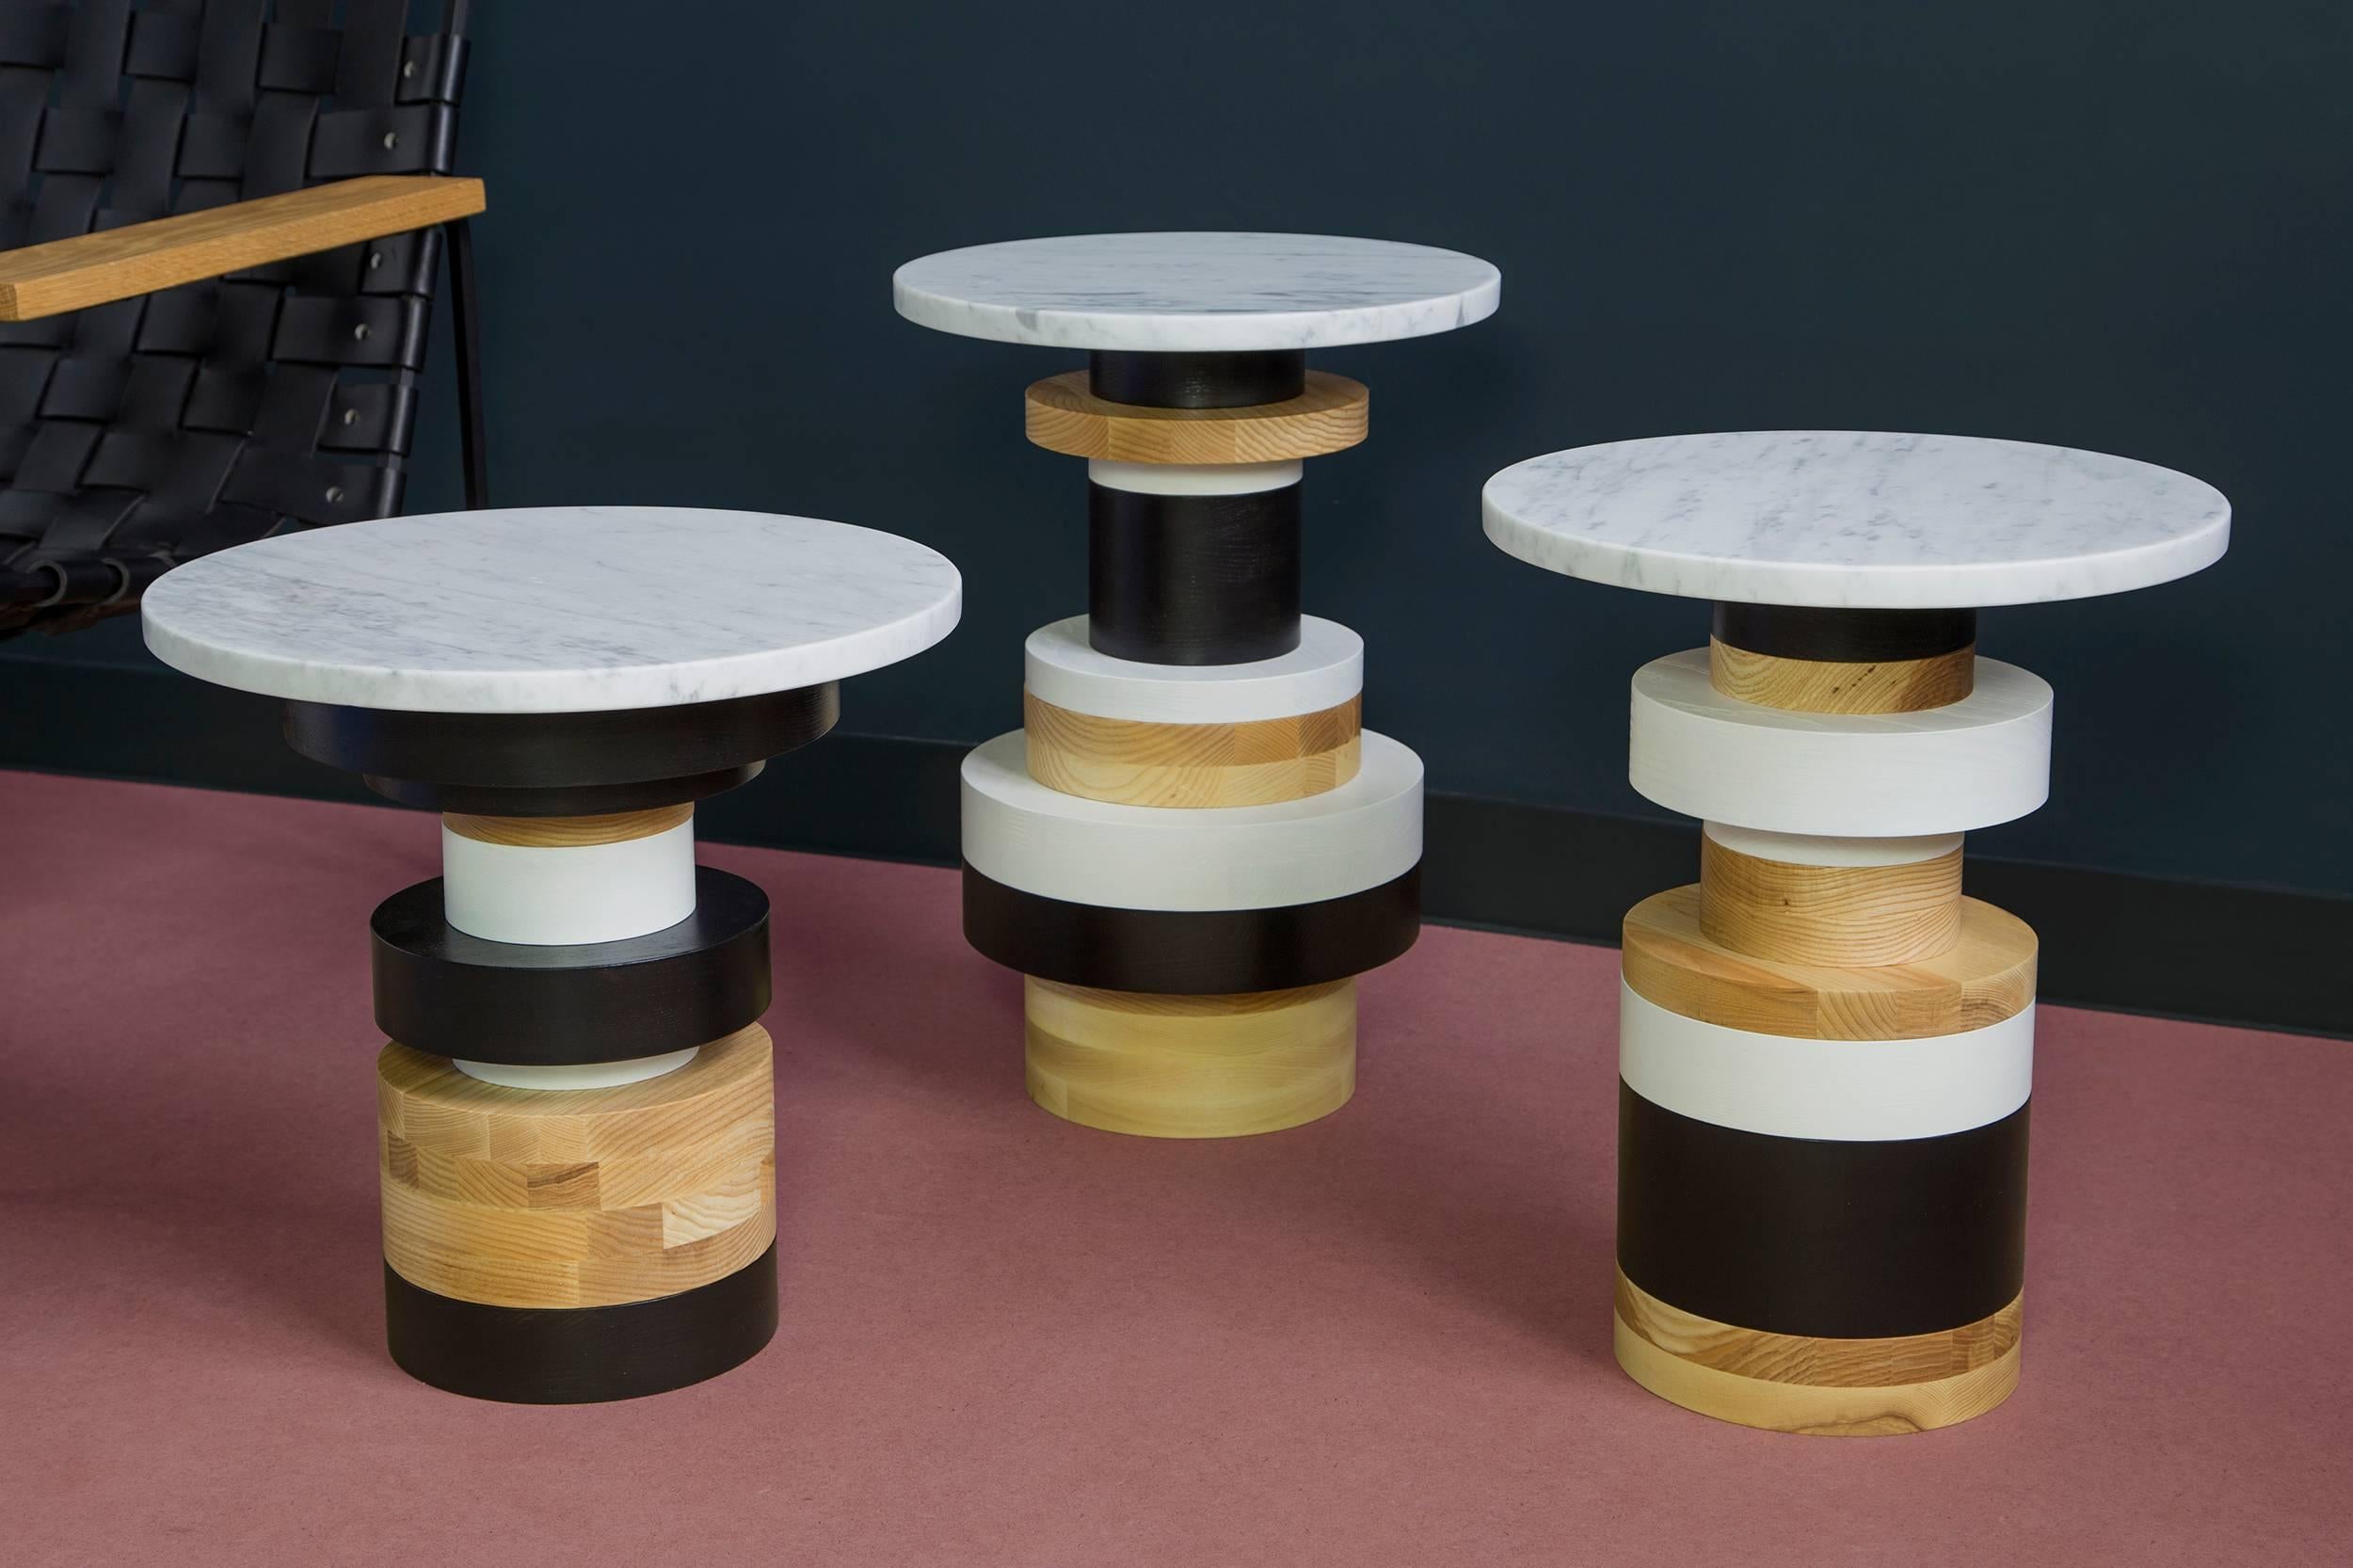 This listing is for three sass tables - one of each size base, as shown in the first image (16in, 18in, 20in). The price includes three 14 inch marble tops. The Sottsass-inspired “Sass Tables” are simple, sculptural accents for any interior space.